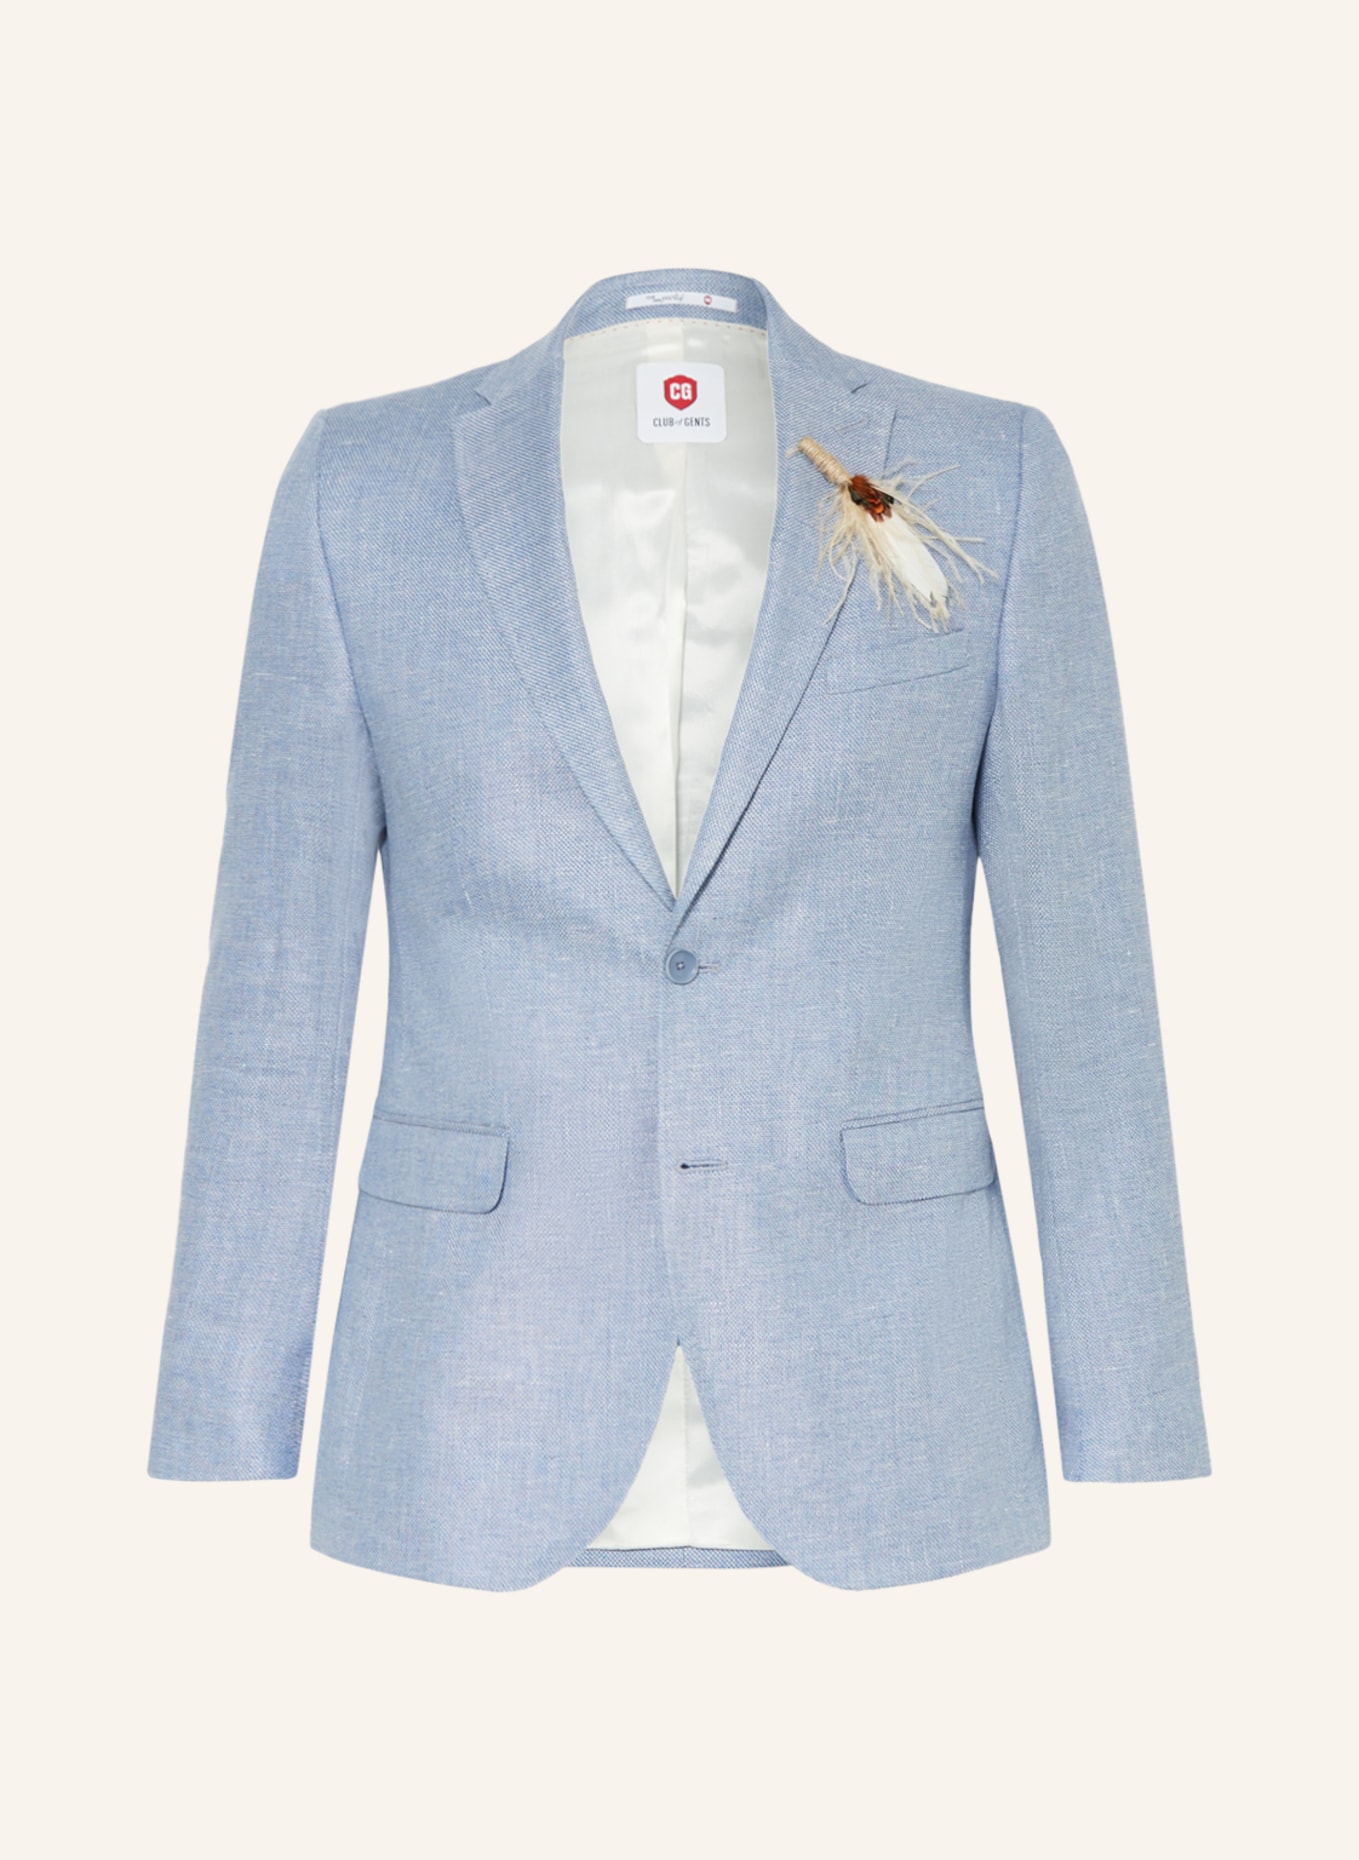 CG - CLUB of GENTS Suit jacket CG PAUL slim fit with linen, Color: 61 BLAU HELL (Image 1)